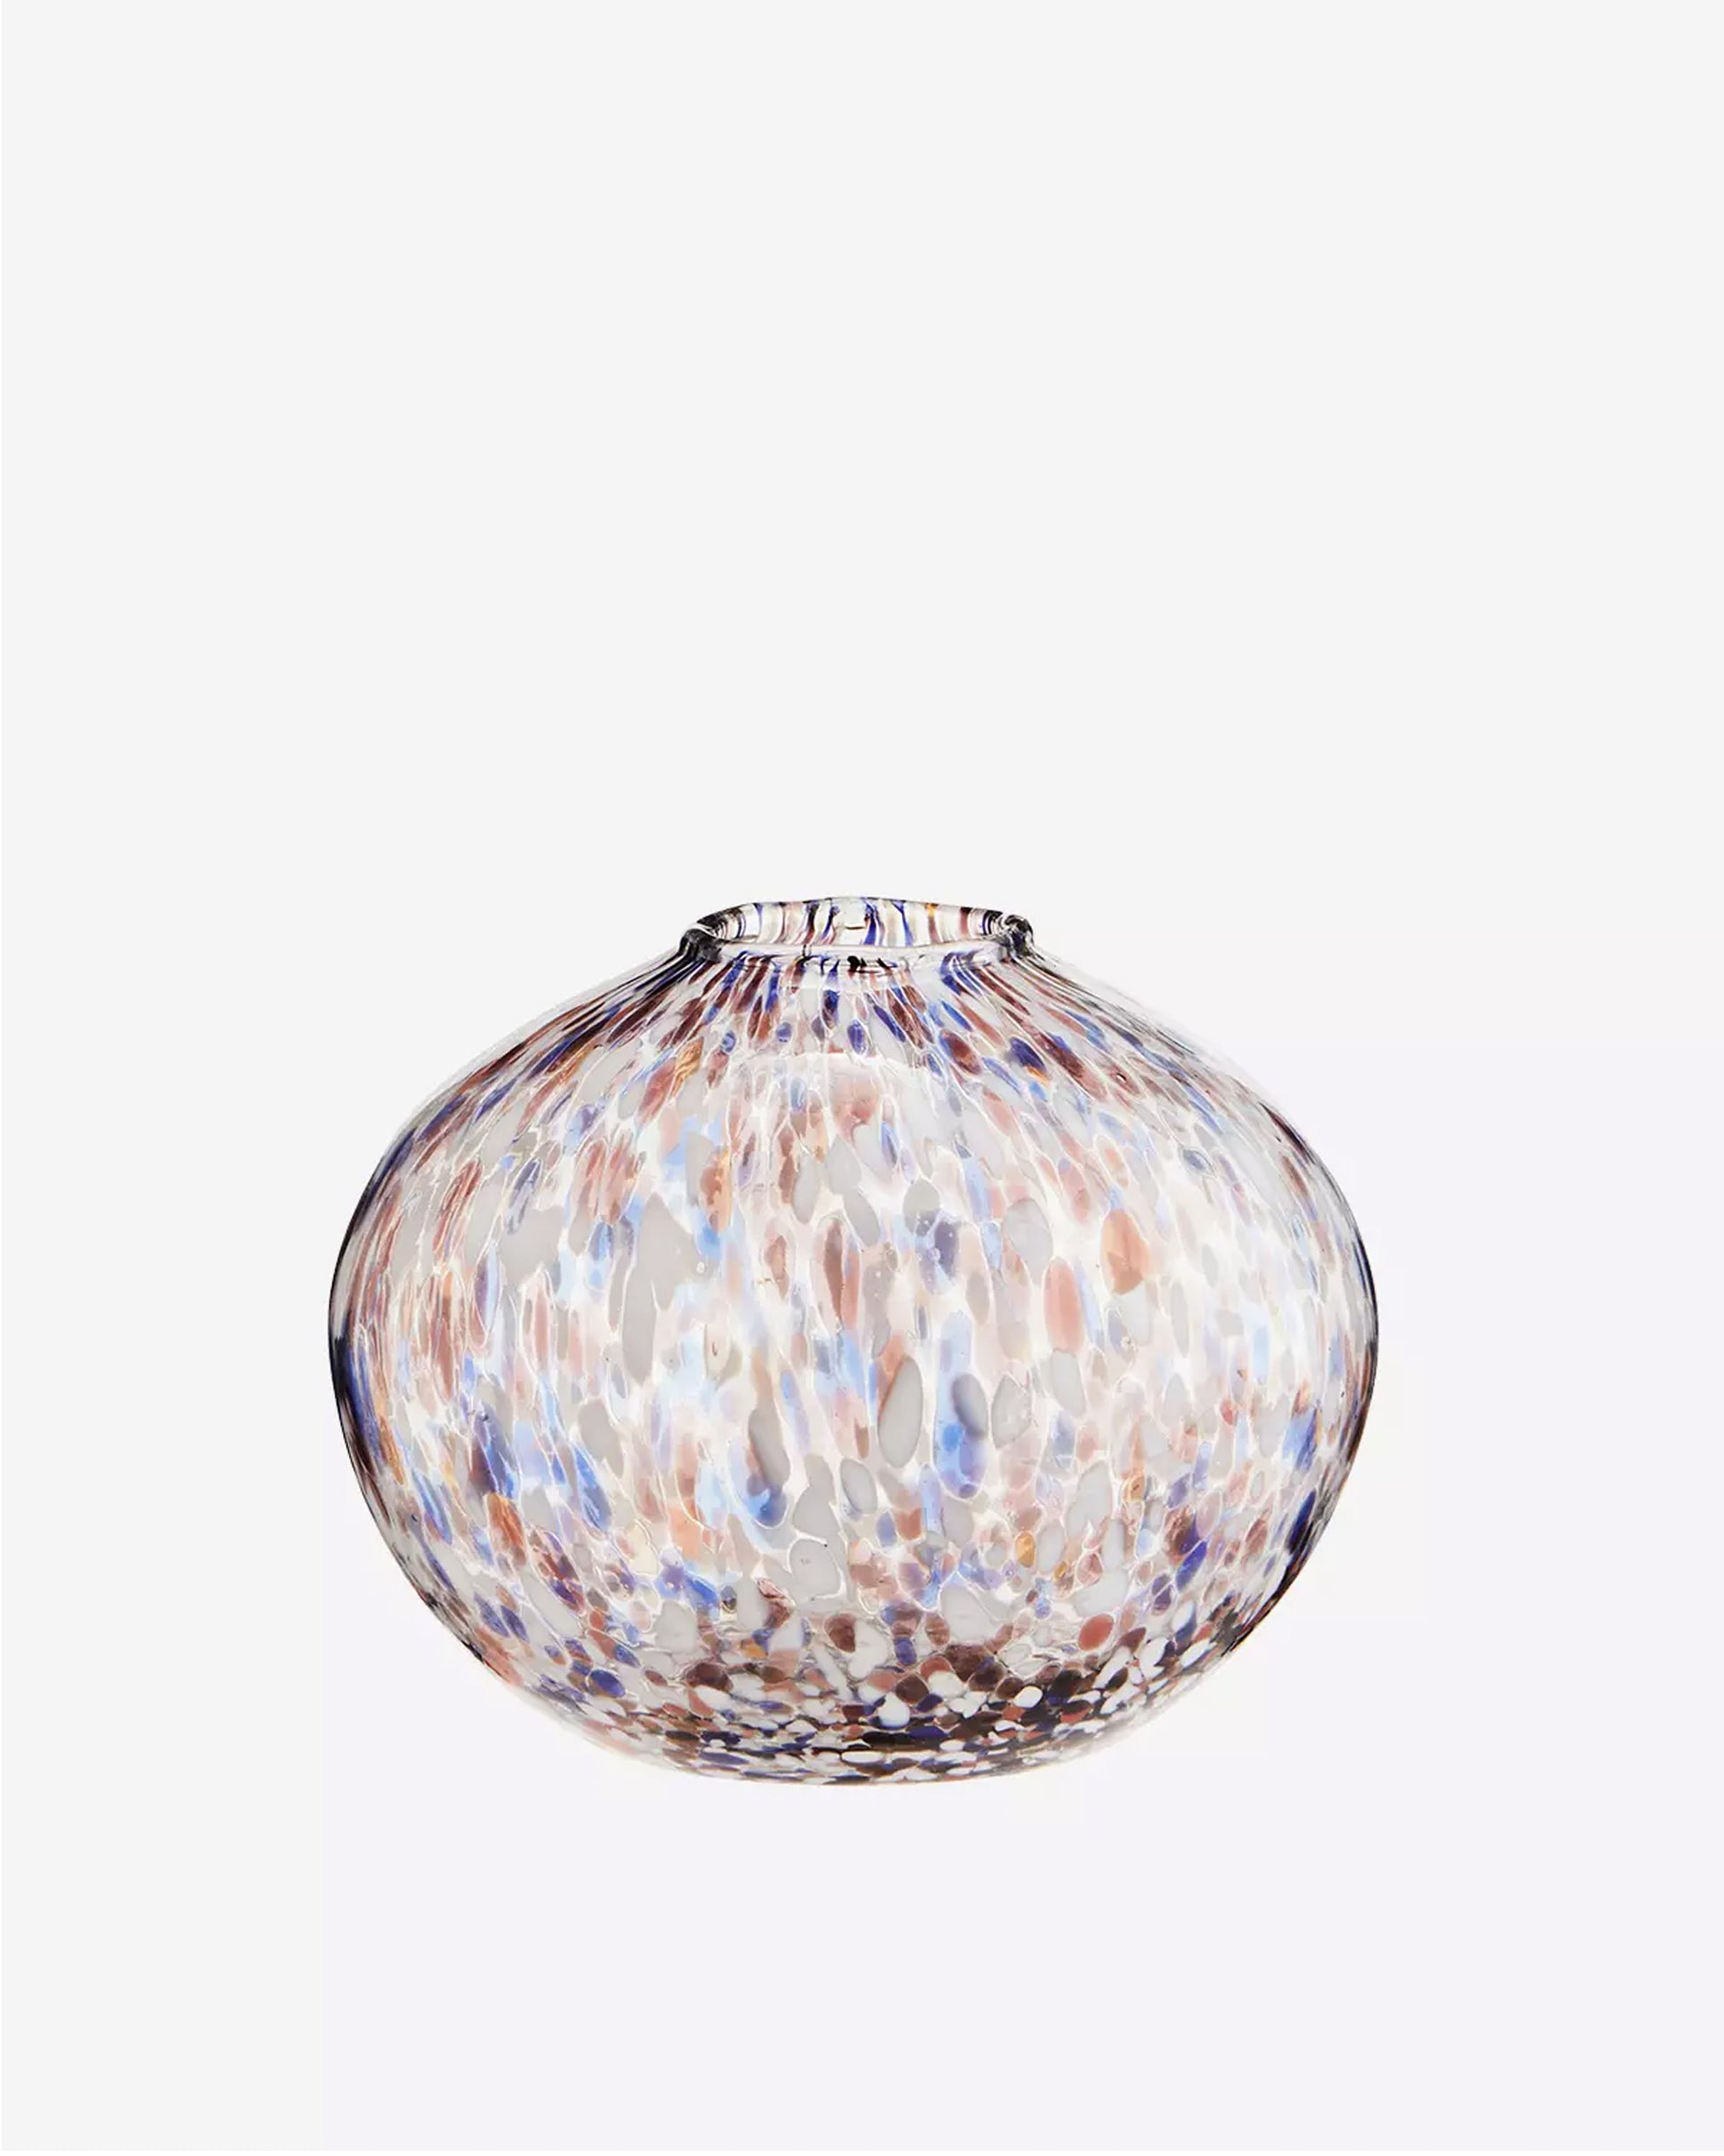 The Every Space handmade multi-coloured glass vase in orange, blue, and white for fresh and dried flowers by Madam Stoltz